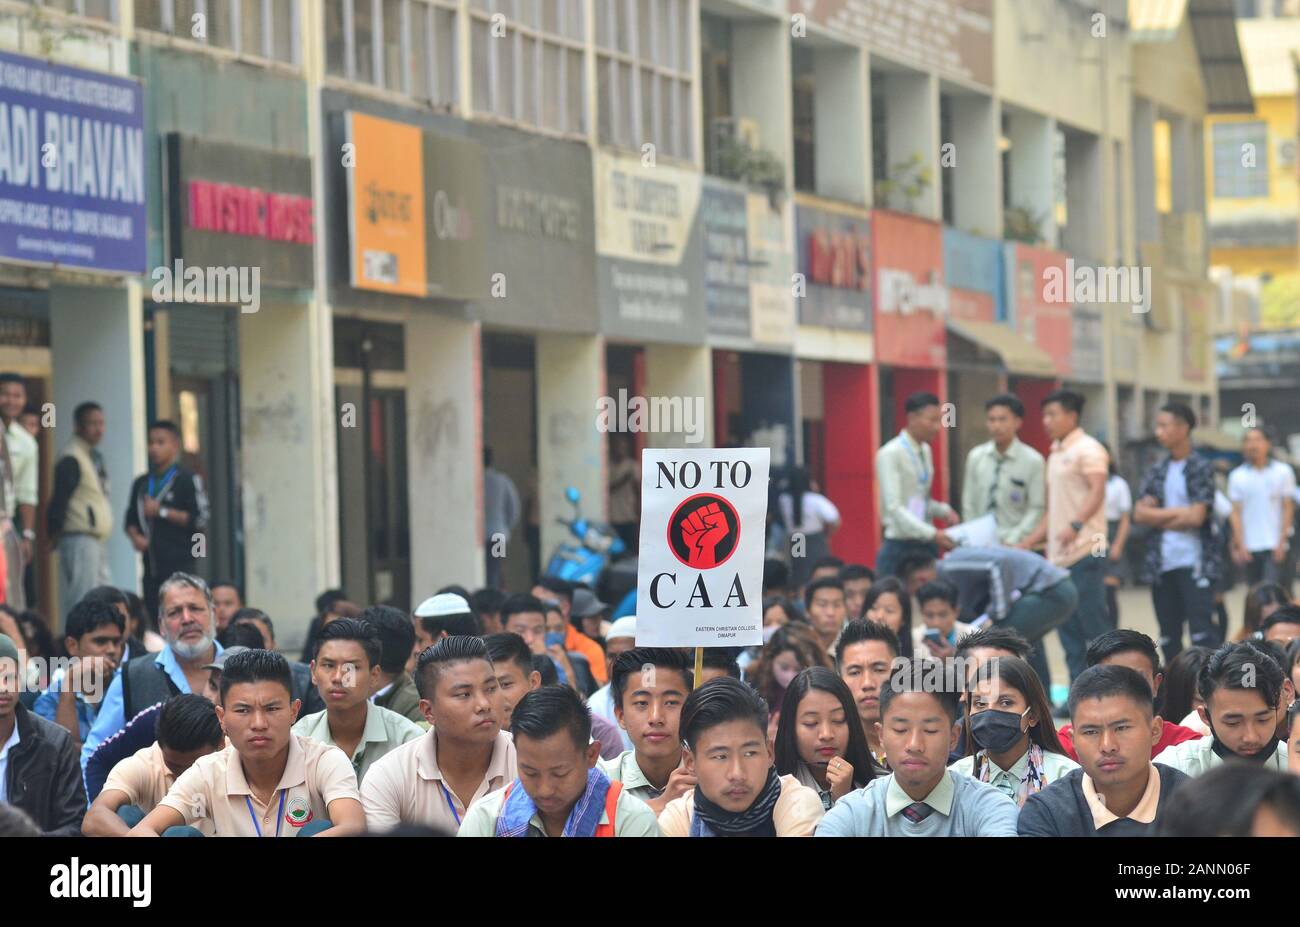 Dimapur, India. 18th Jan 2020: Student’s holds placard during a protest against Citizenship Amendment Act 2019 (CAA) in Dimapur, India north eastern state of Nagaland. Credit: Caisii Ma/Alamy Live News Stock Photo